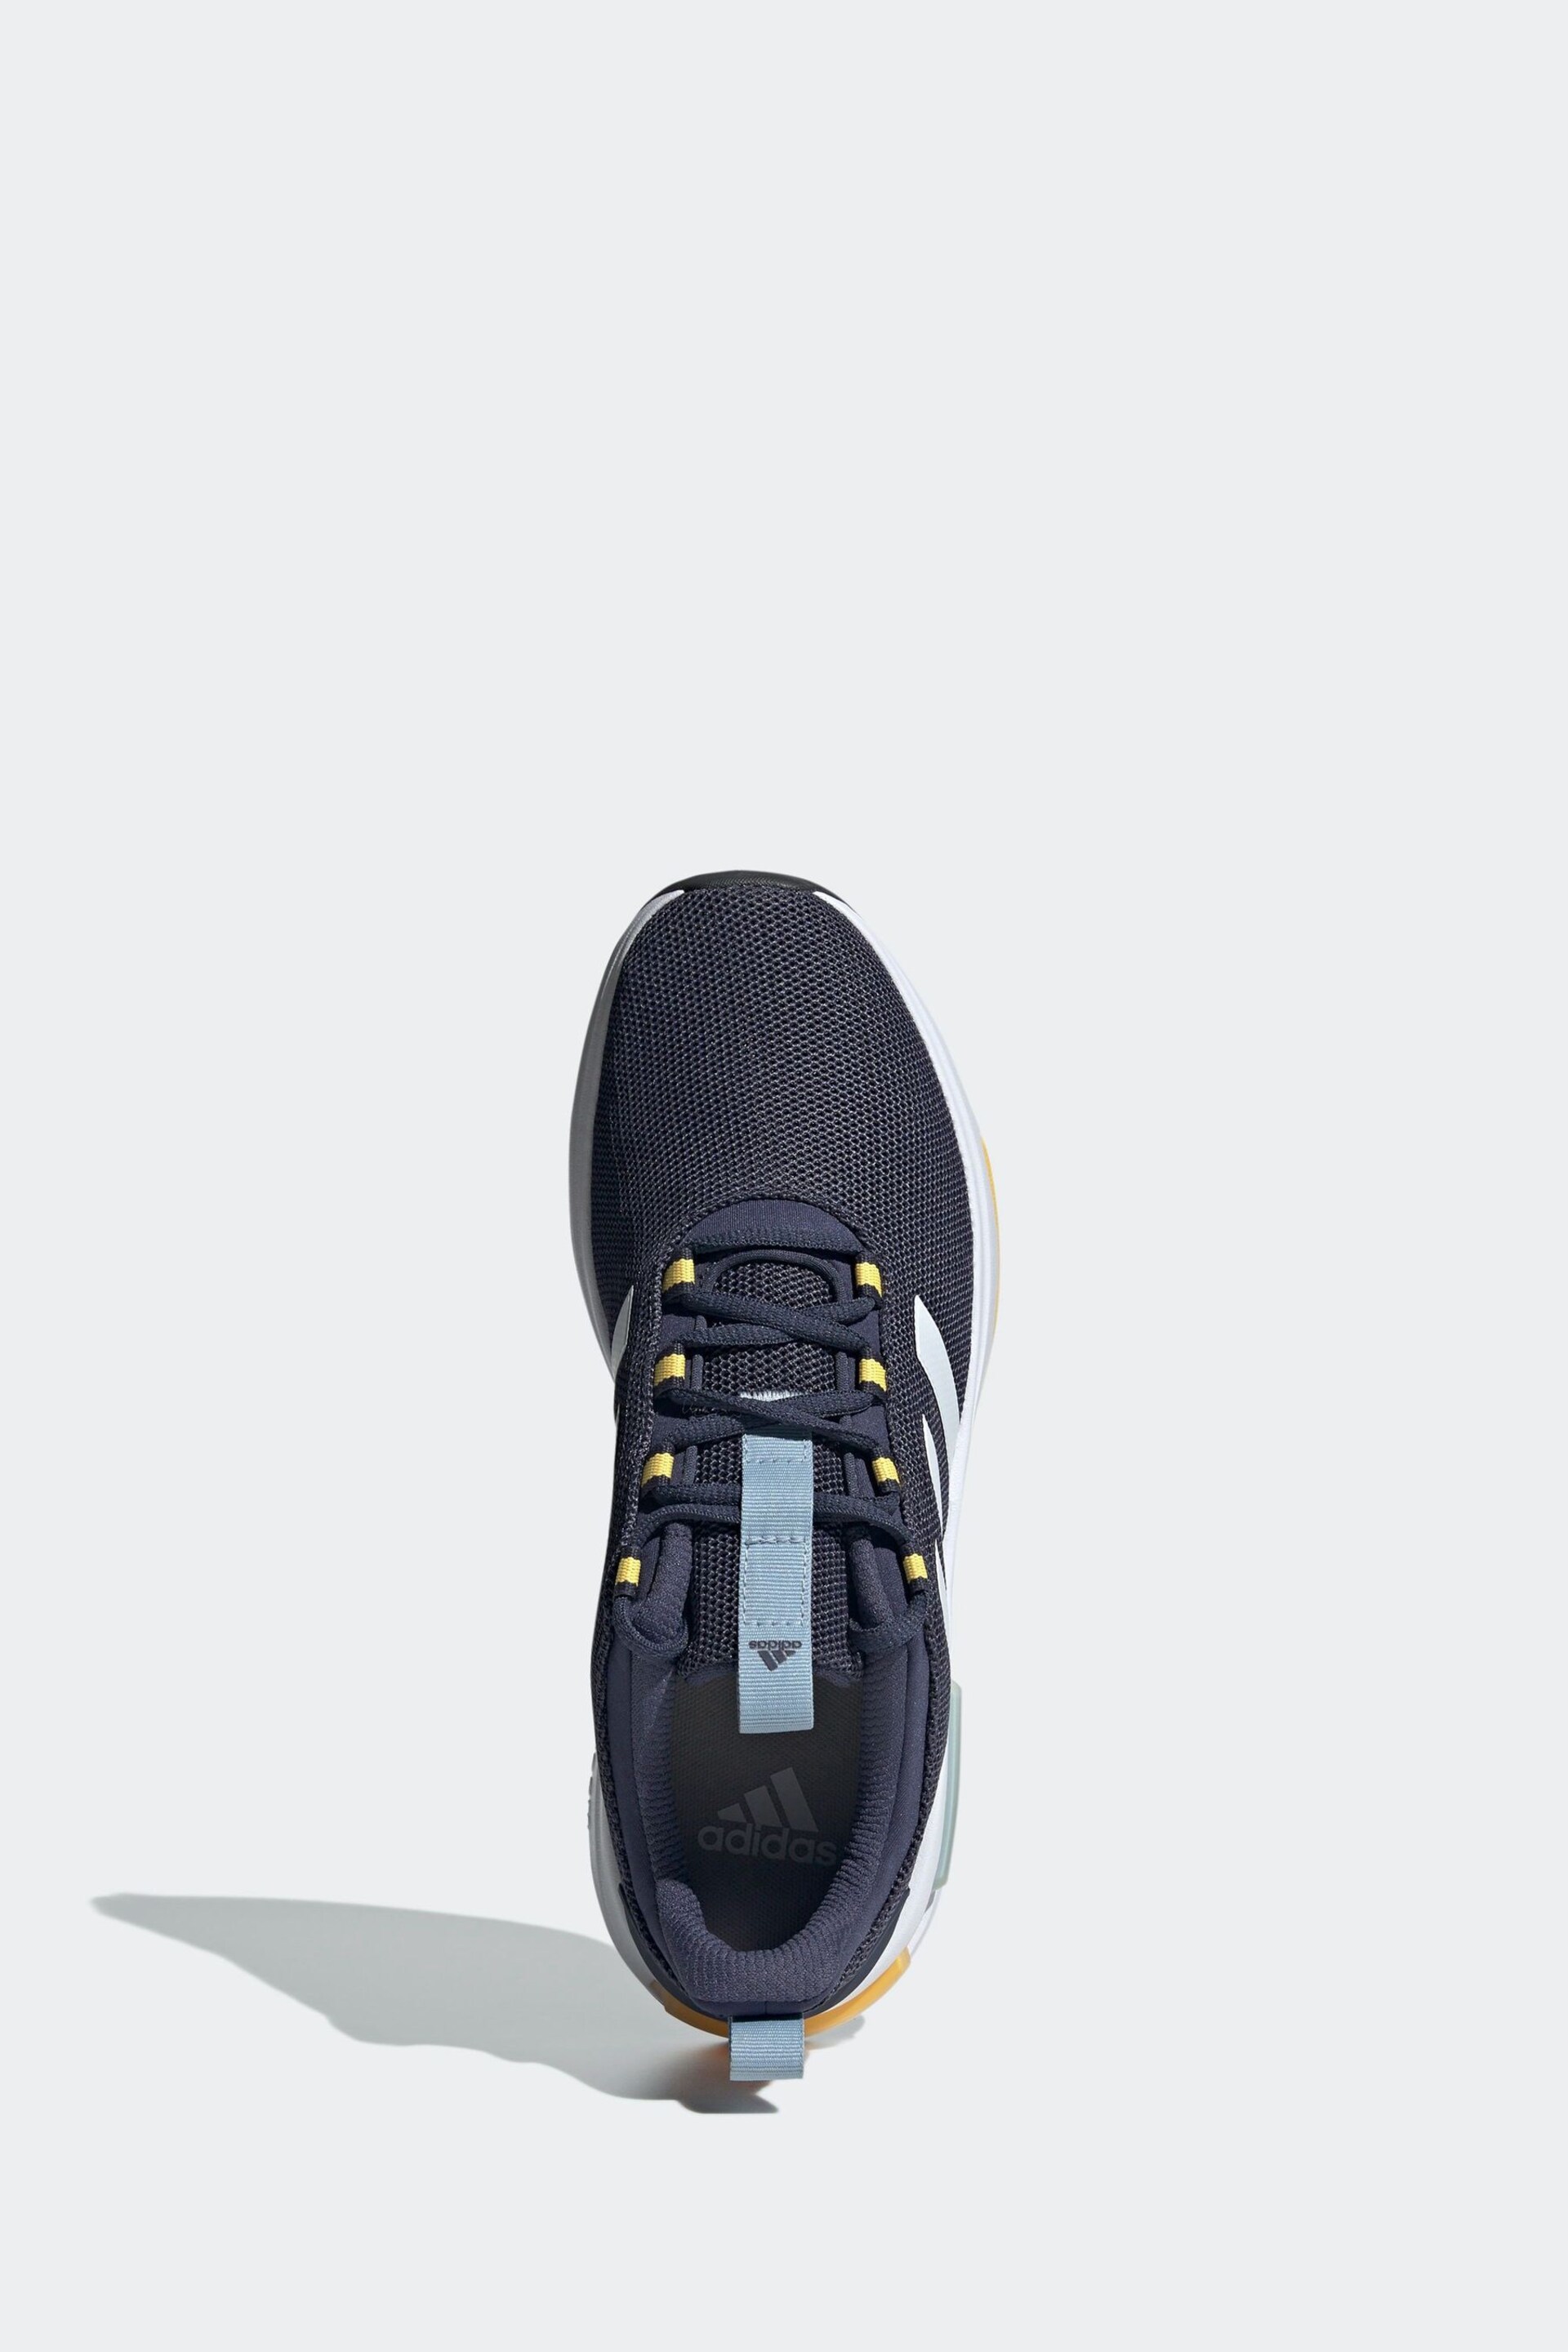 adidas Blue Sportswear Racer TR23 Trainers - Image 6 of 9